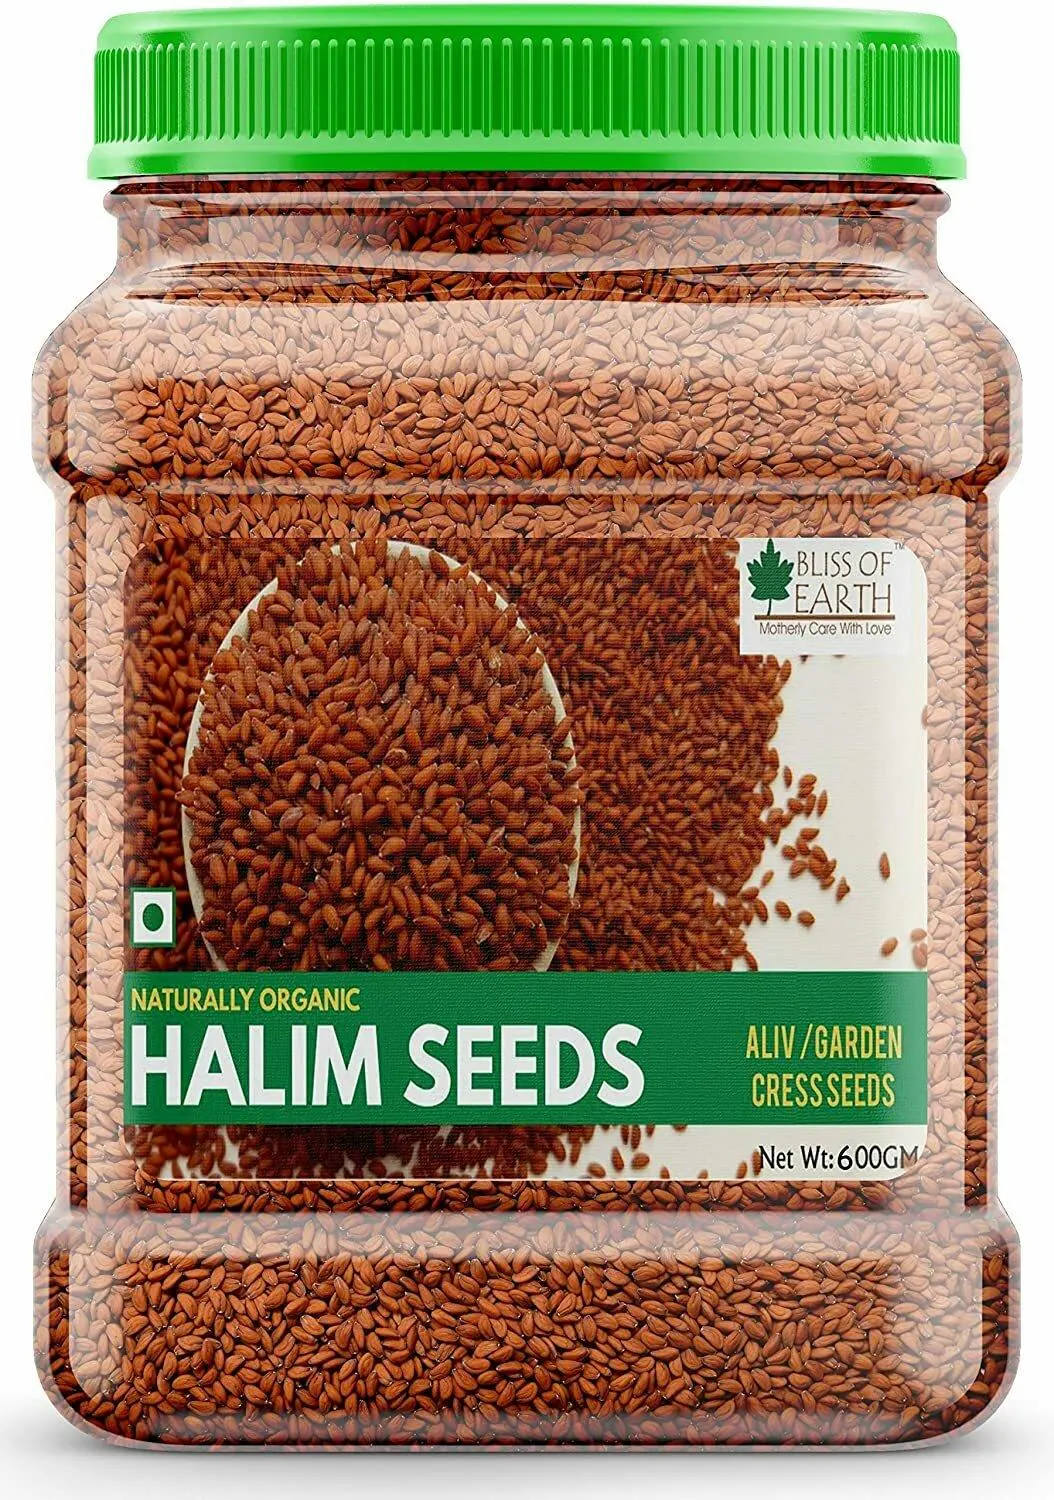 Bliss Of Earth 600gm Halim Seeds Organic for Eating, Aliv Seeds for Hair, Garden  Cress Seed for Immunity Booster - JioMart